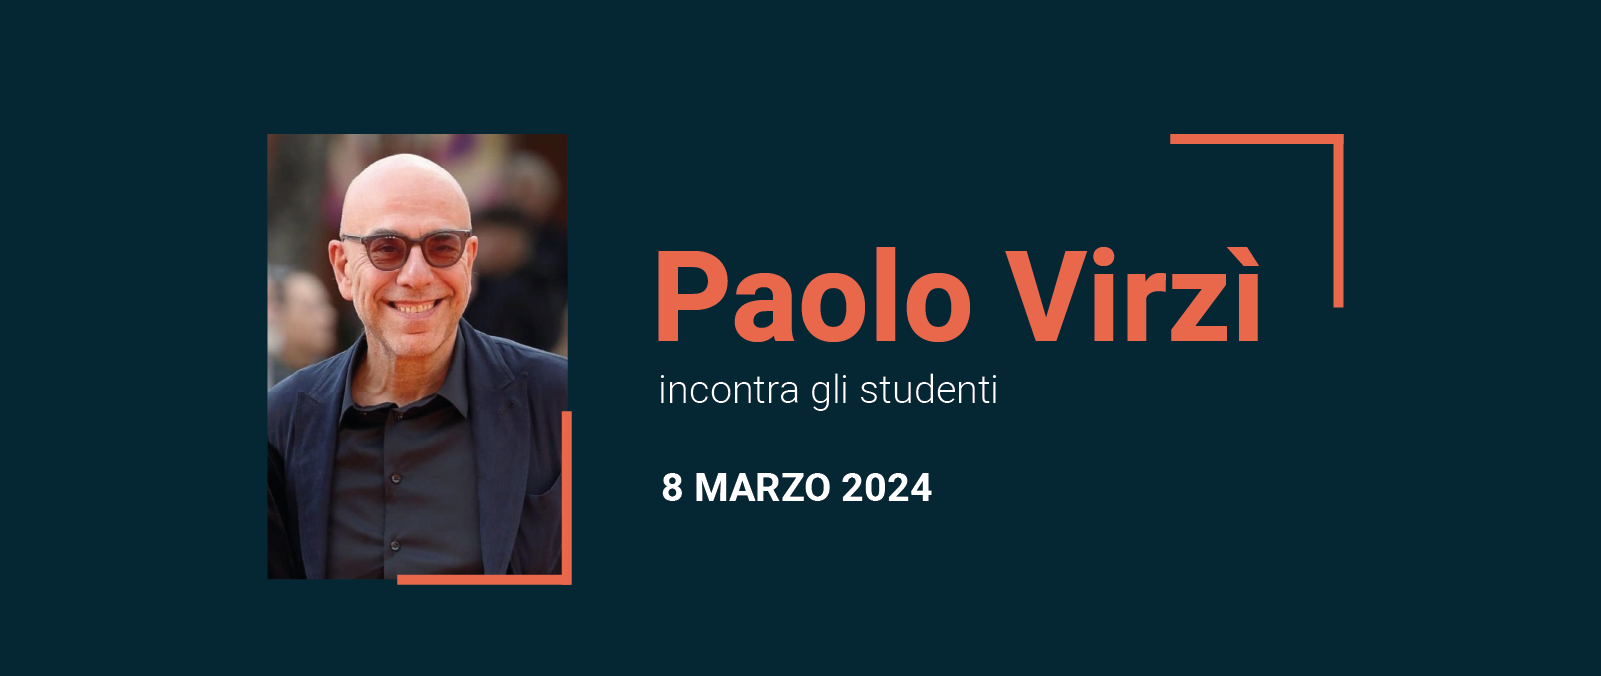 Paolo Virzi meets with students